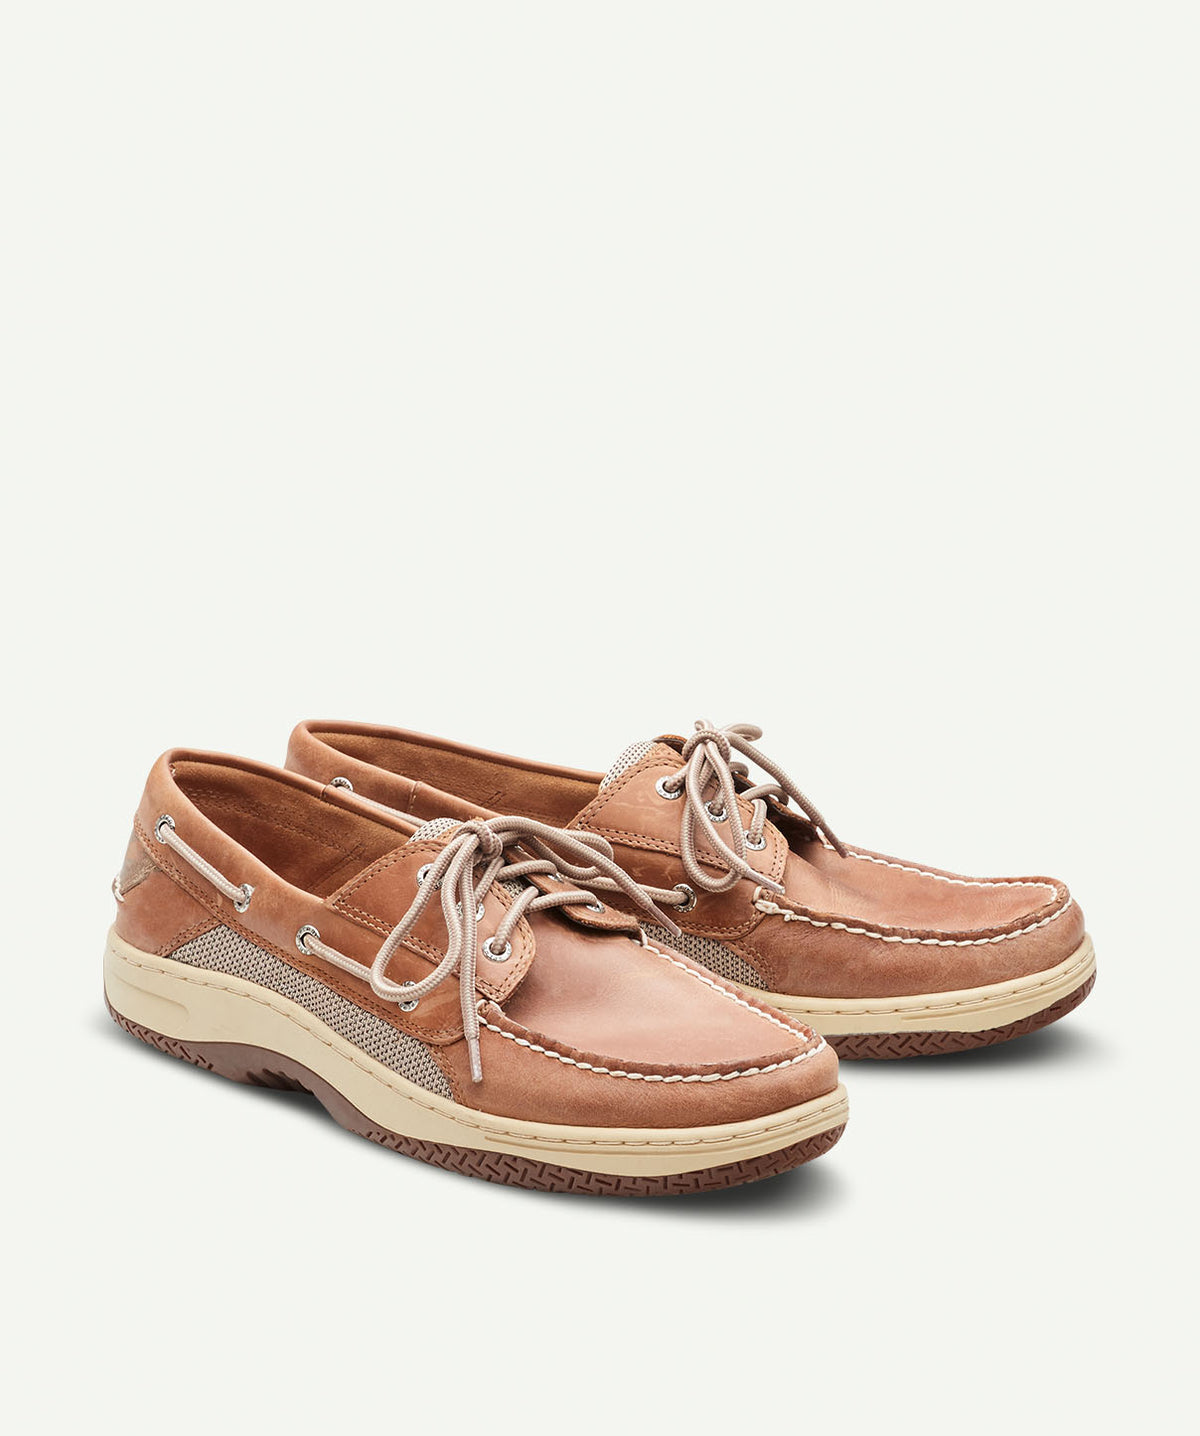 sperry boat shoes on sale